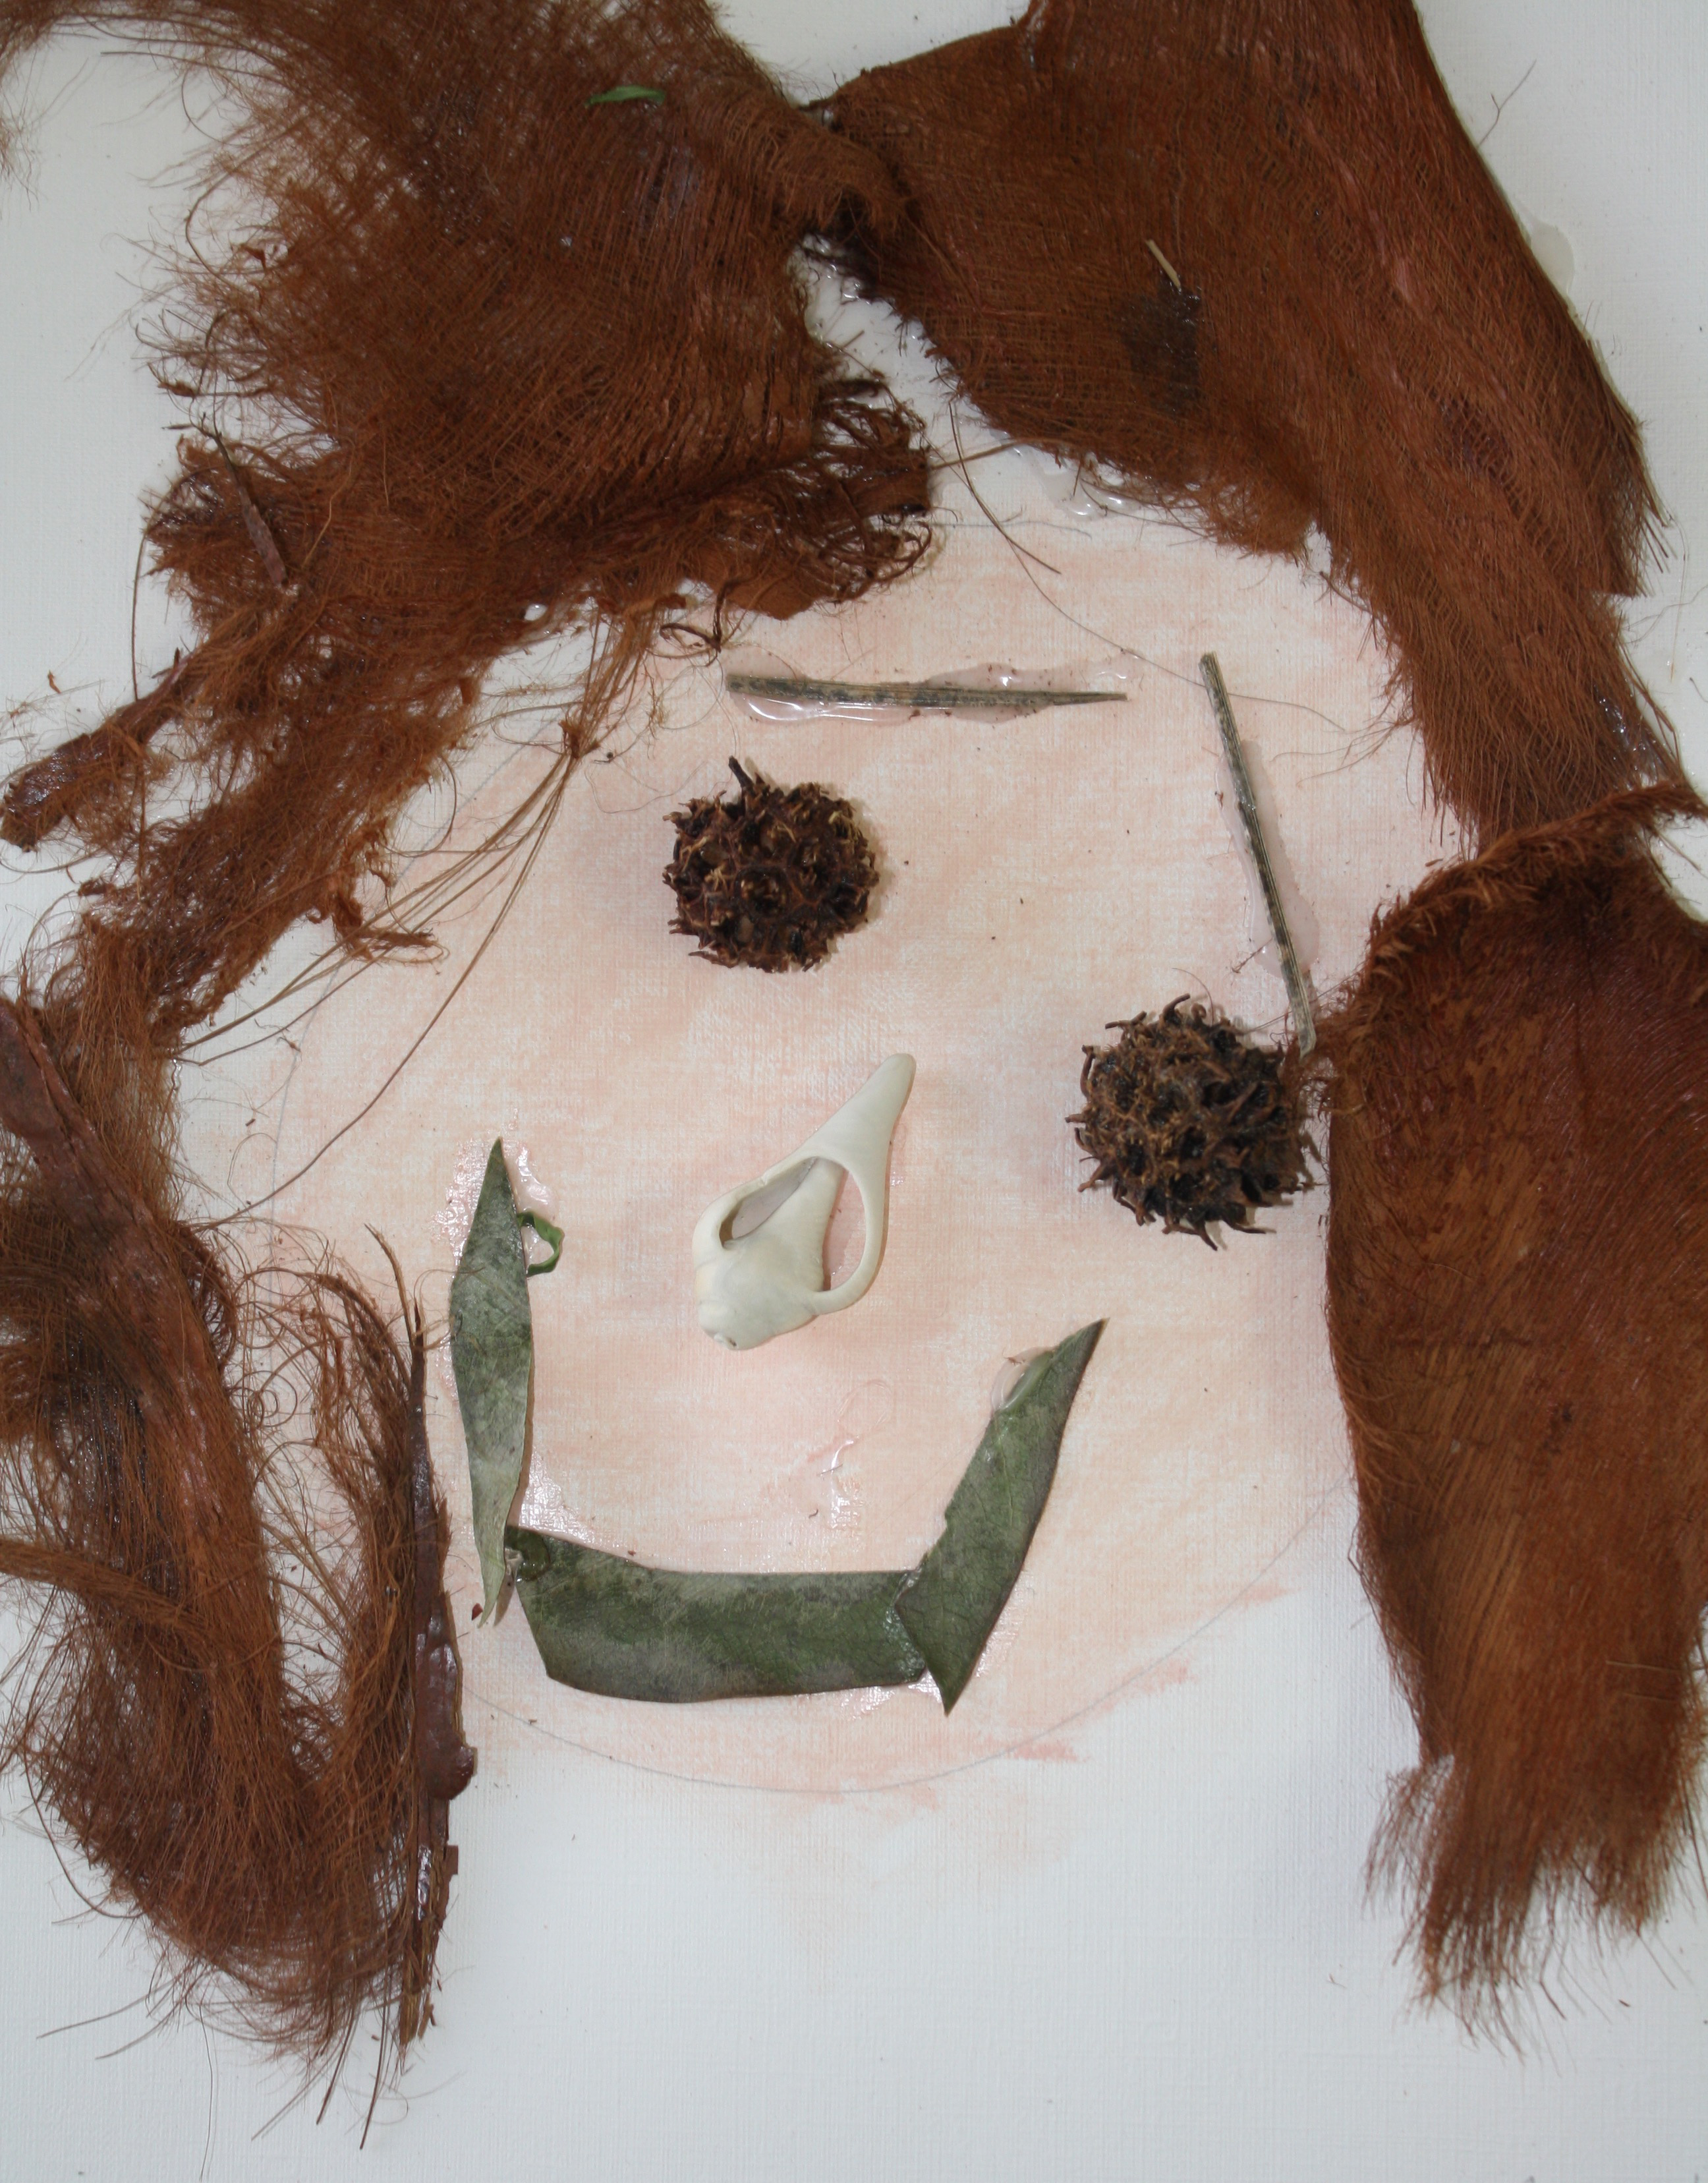 Child's self-portrait collage using natural materials